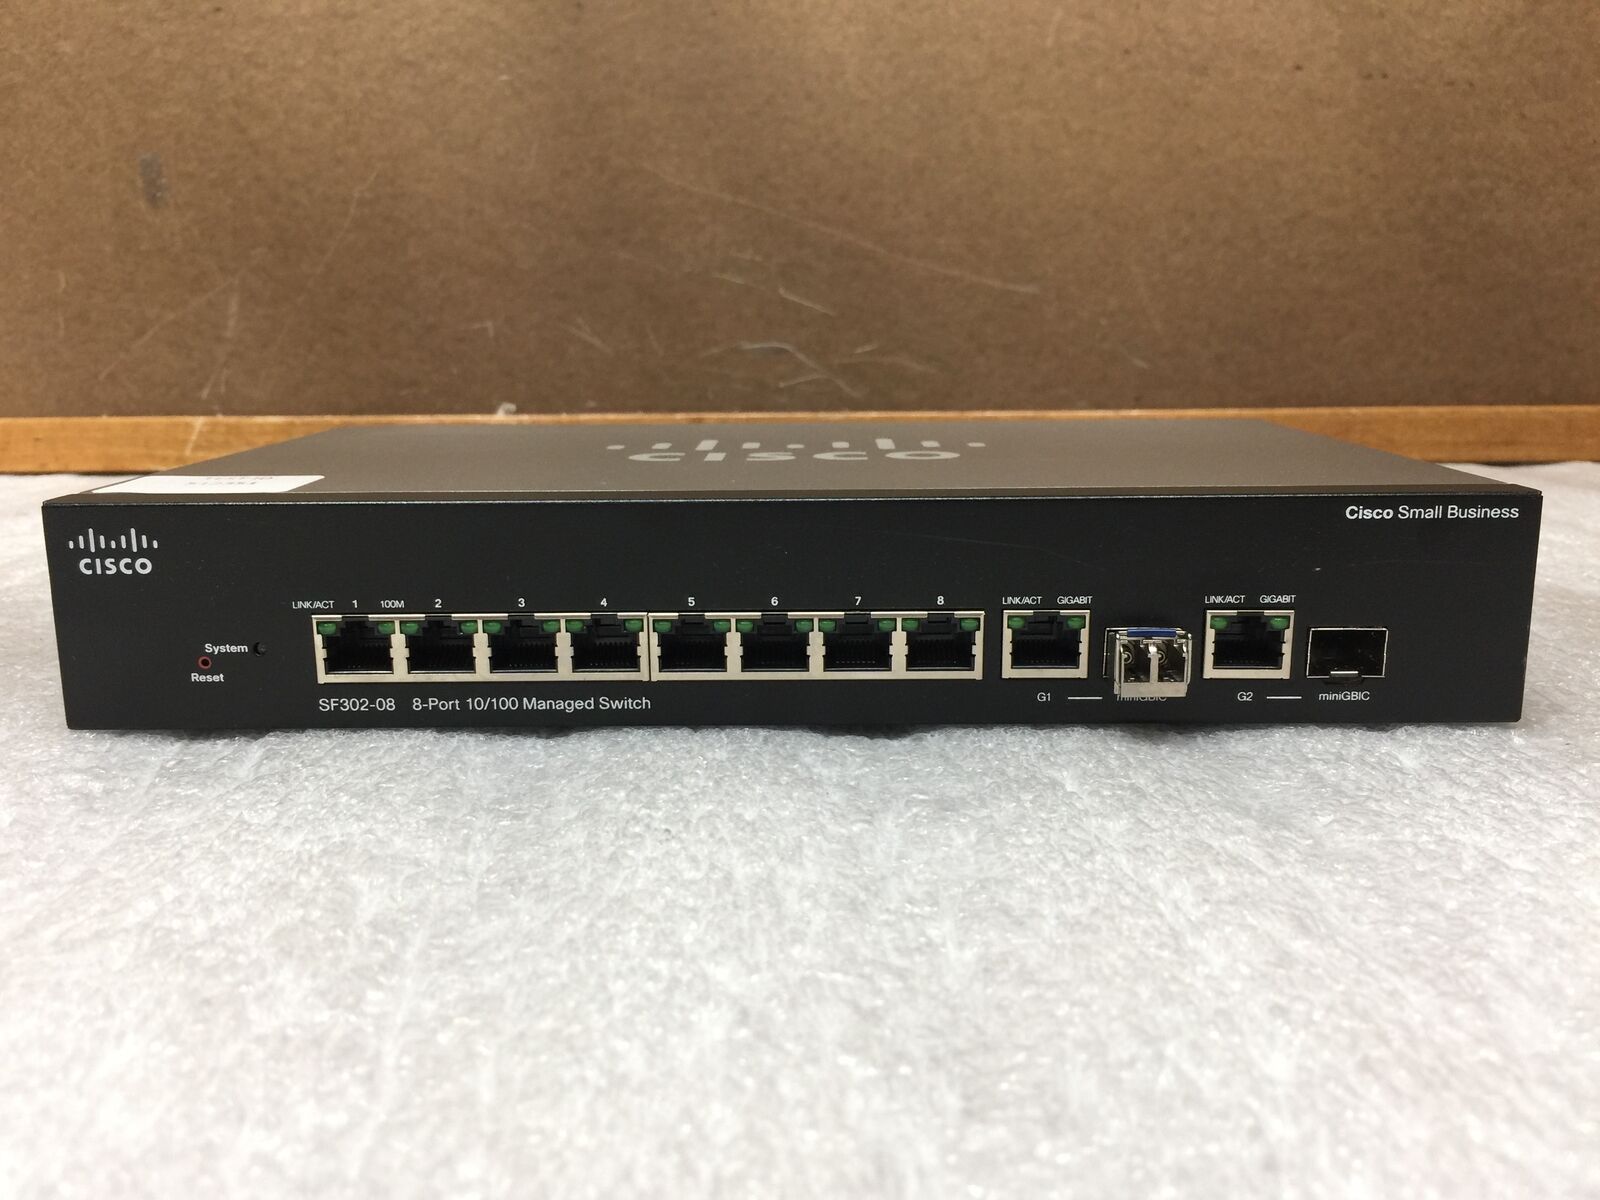 Cisco SF302-08P 8-Port Fast 10/100 PoE Managed Switch SRW208P-K9, Tested/Reset